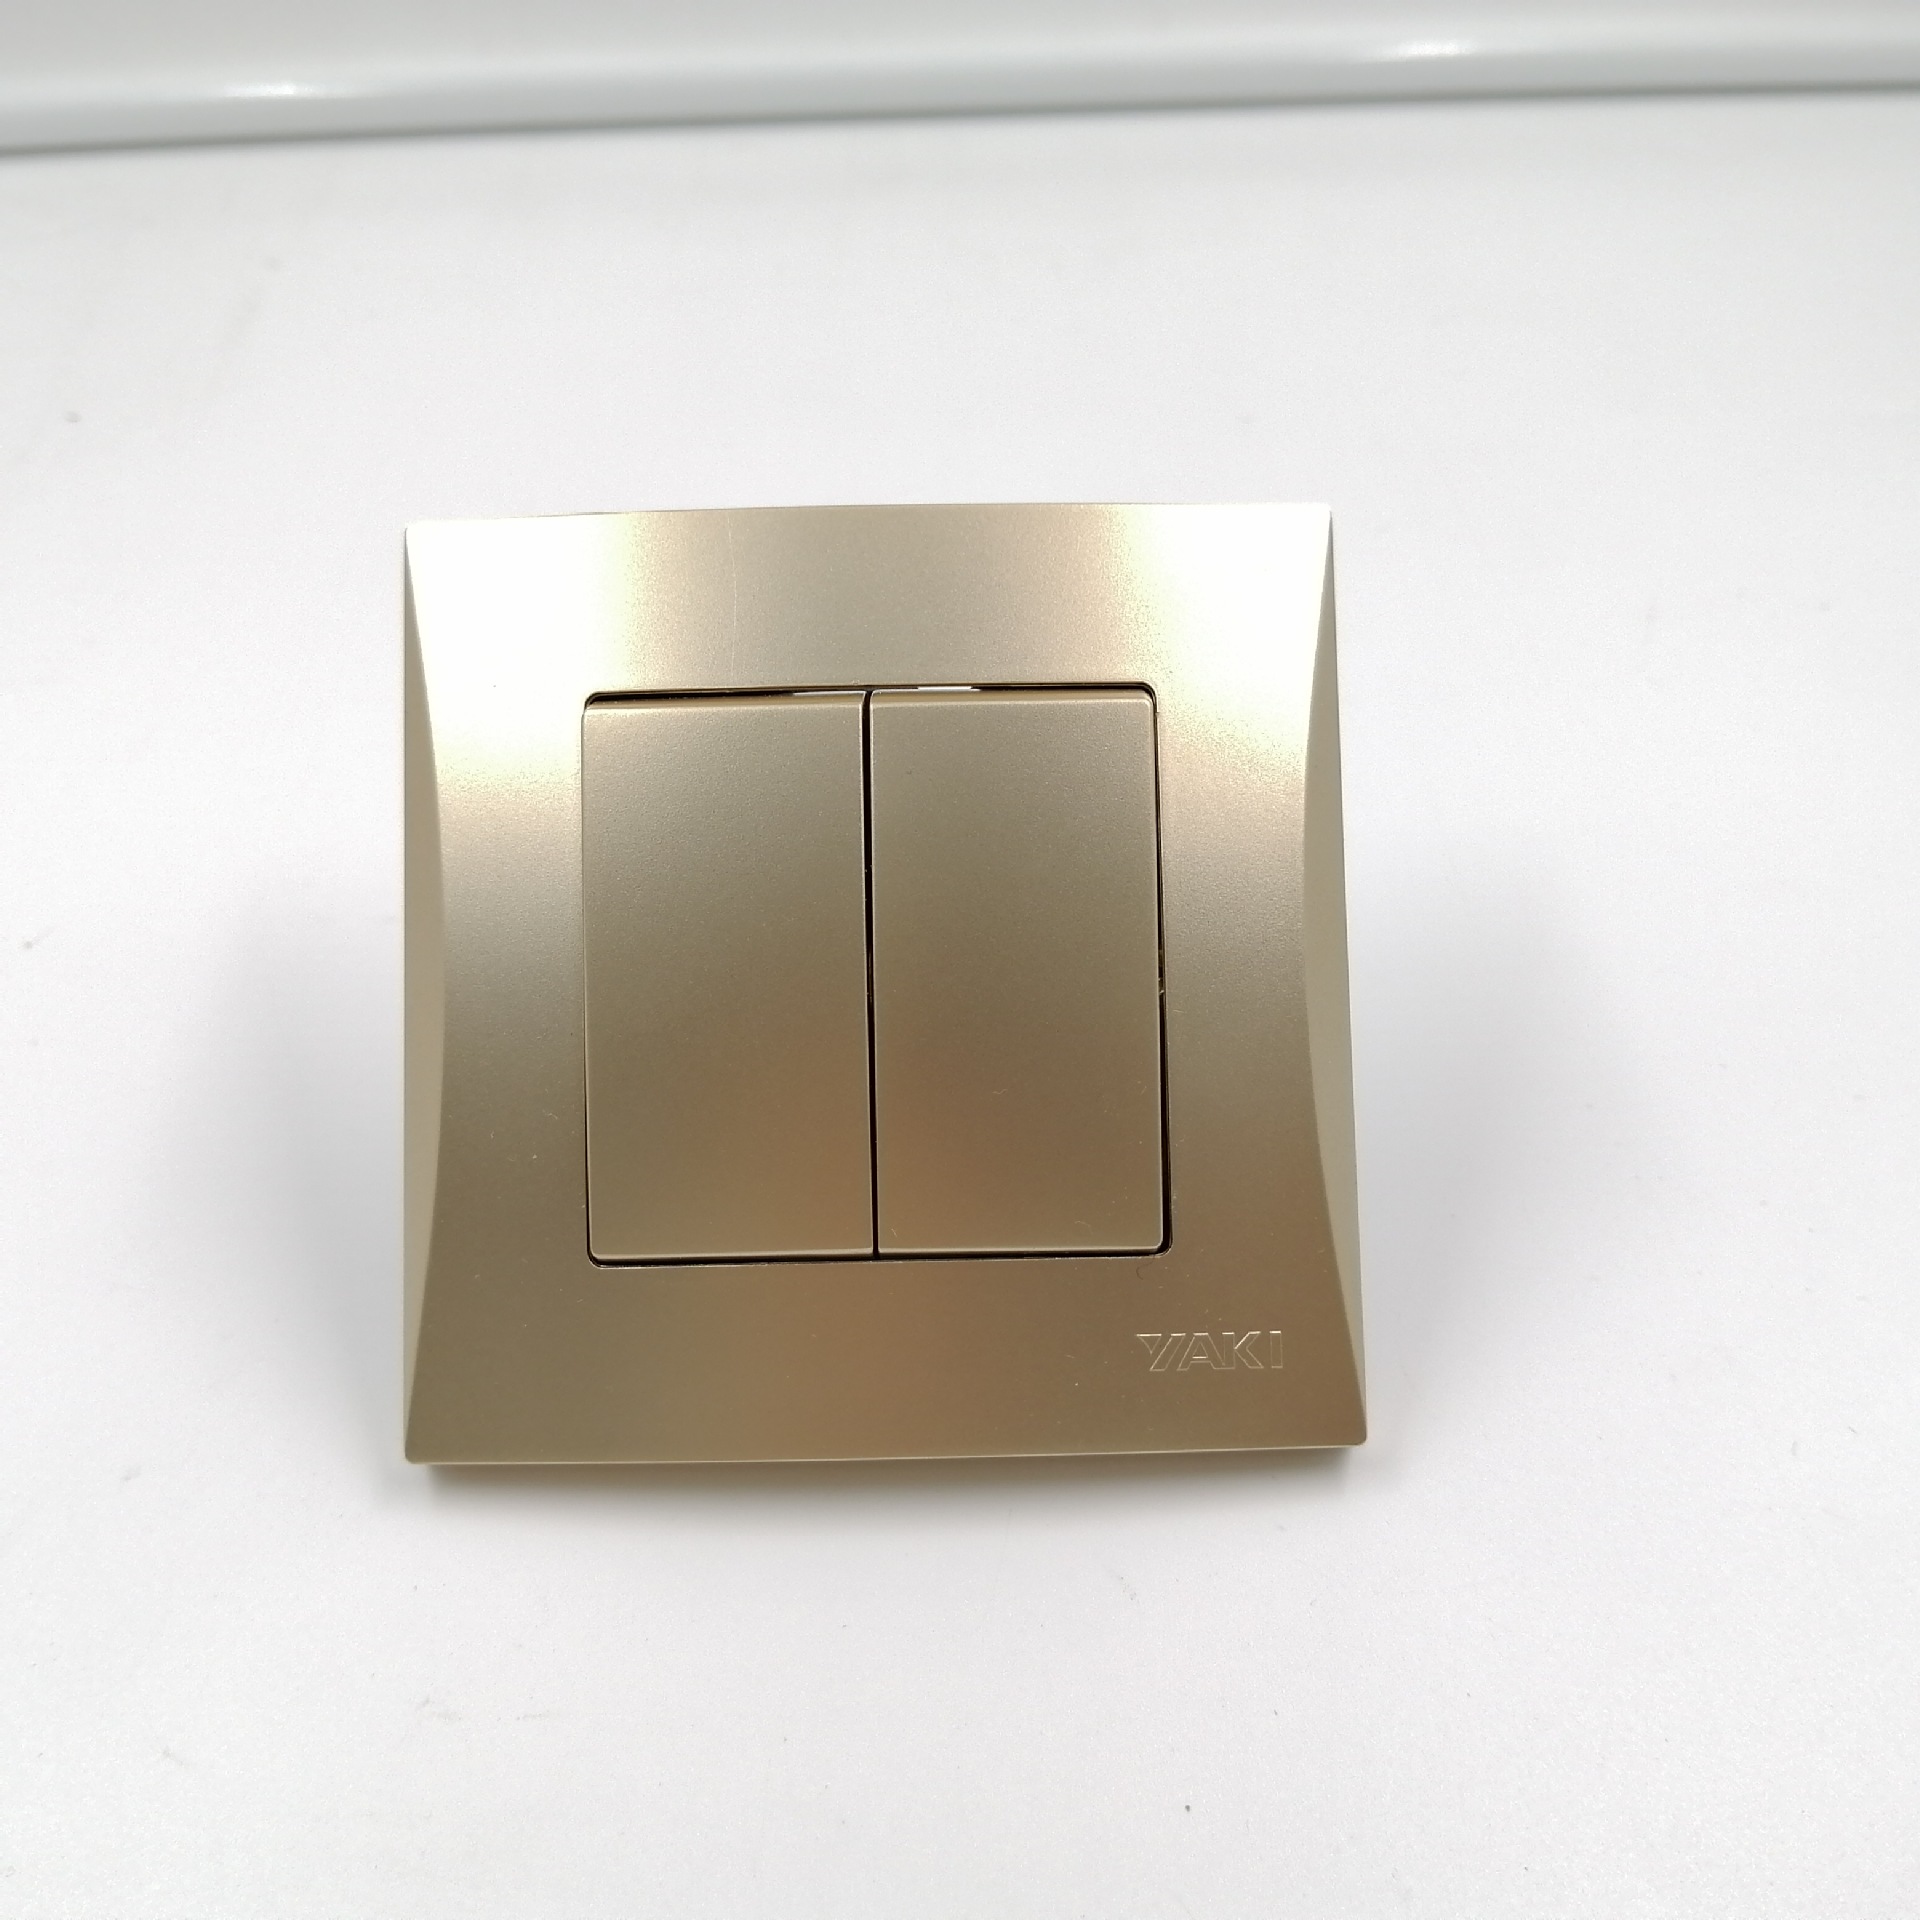 Safety Dual Control Official Independent Europe Golden Wall Light Switch For Home